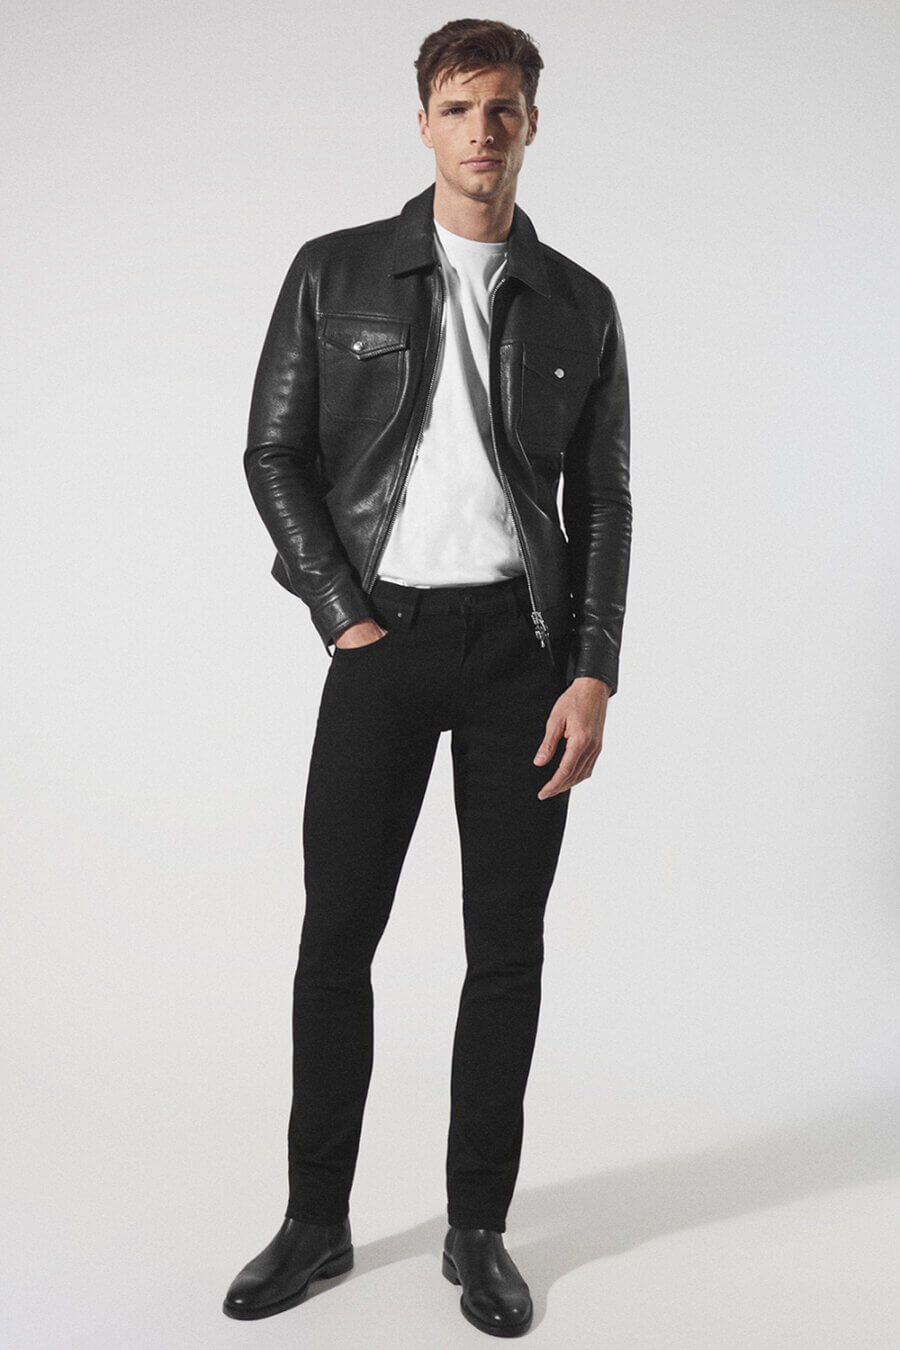 Men's black leather trucker jacket, white T-shirt, black jeans and Chelsea boots outfit